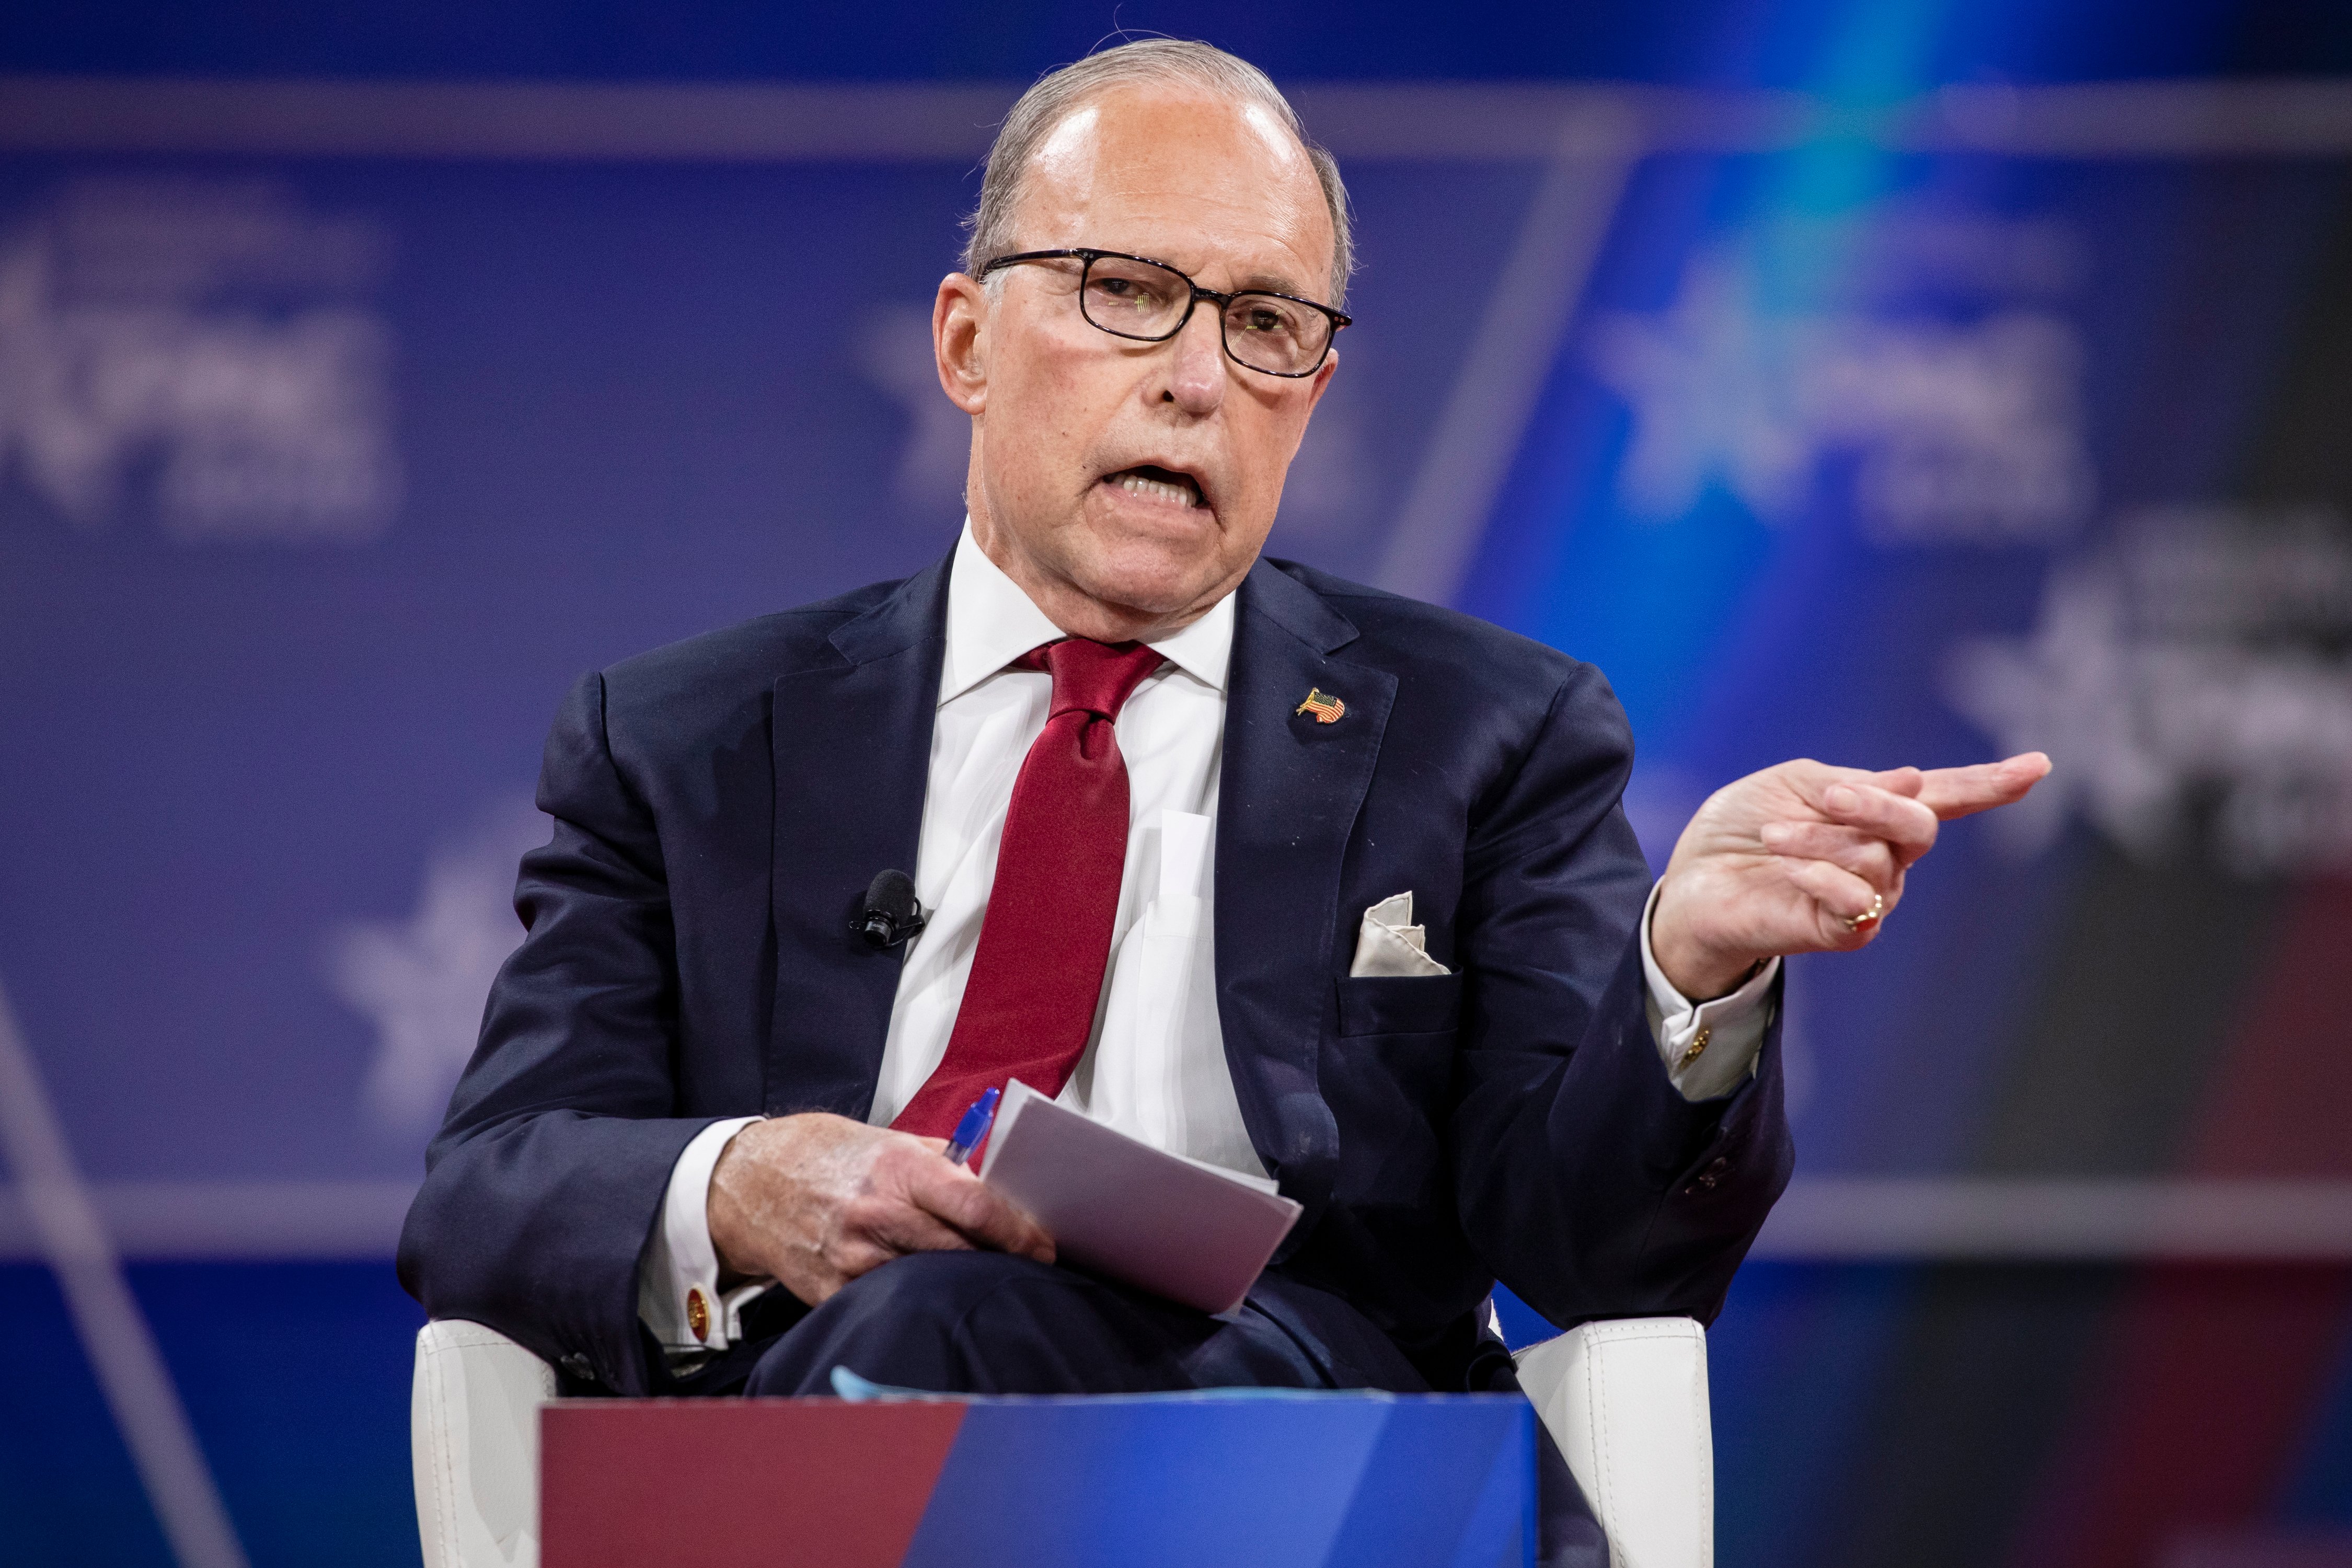 NATIONAL HARBOR, MD - FEBRUARY 28: Larry Kudlow, Director of the White House National Economic Council, speaks at the Conservative Political Action Conference 2020 (CPAC) hosted by the American Conservative Union on February 28, 2020 in National Harbor, MD. (Photo by Samuel Corum/Getty Images)